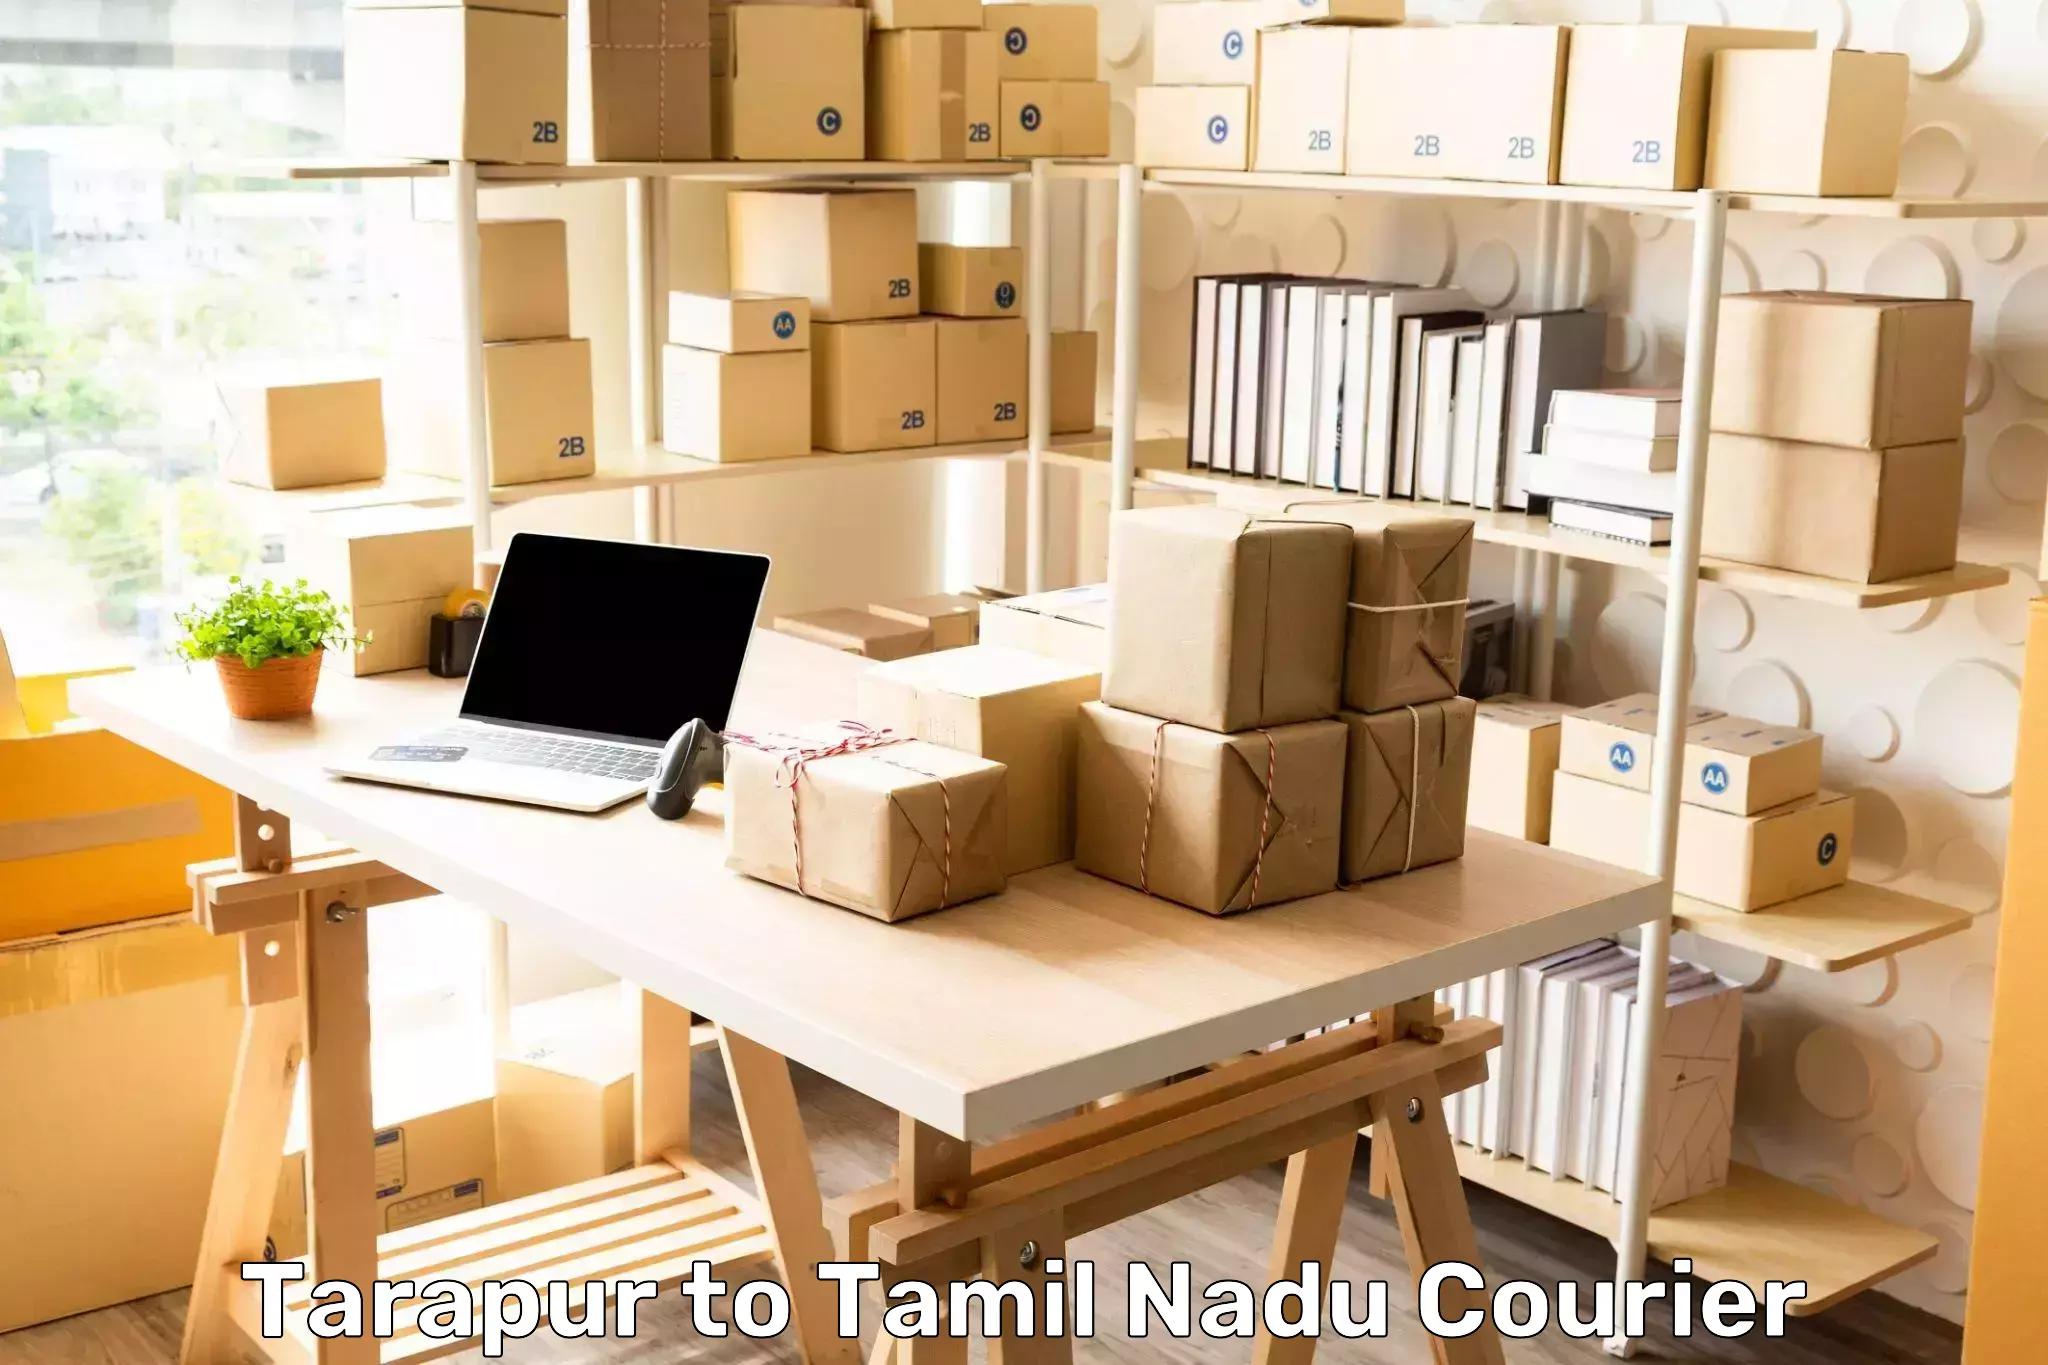 Express delivery capabilities Tarapur to Nagercoil